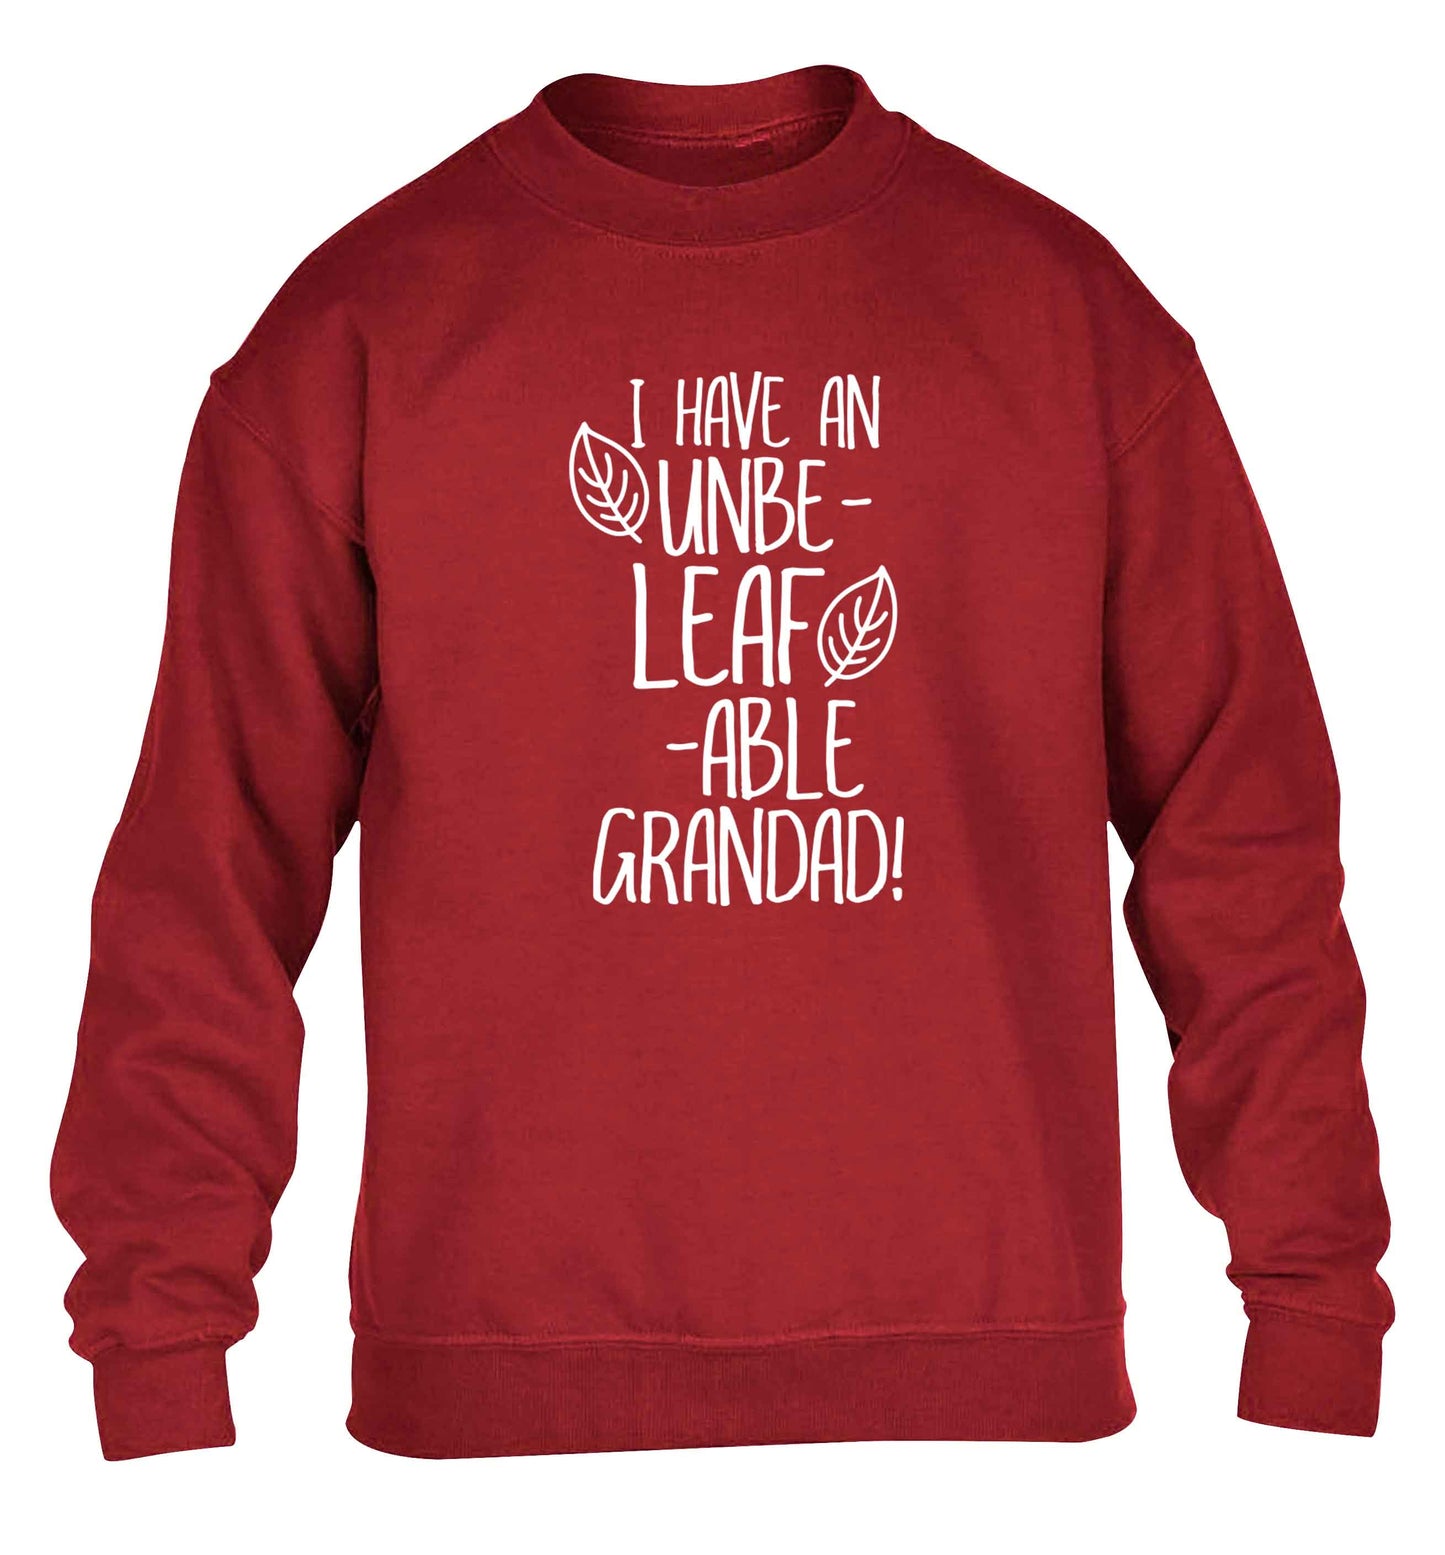 I have an unbe-leaf-able grandad children's grey sweater 12-13 Years